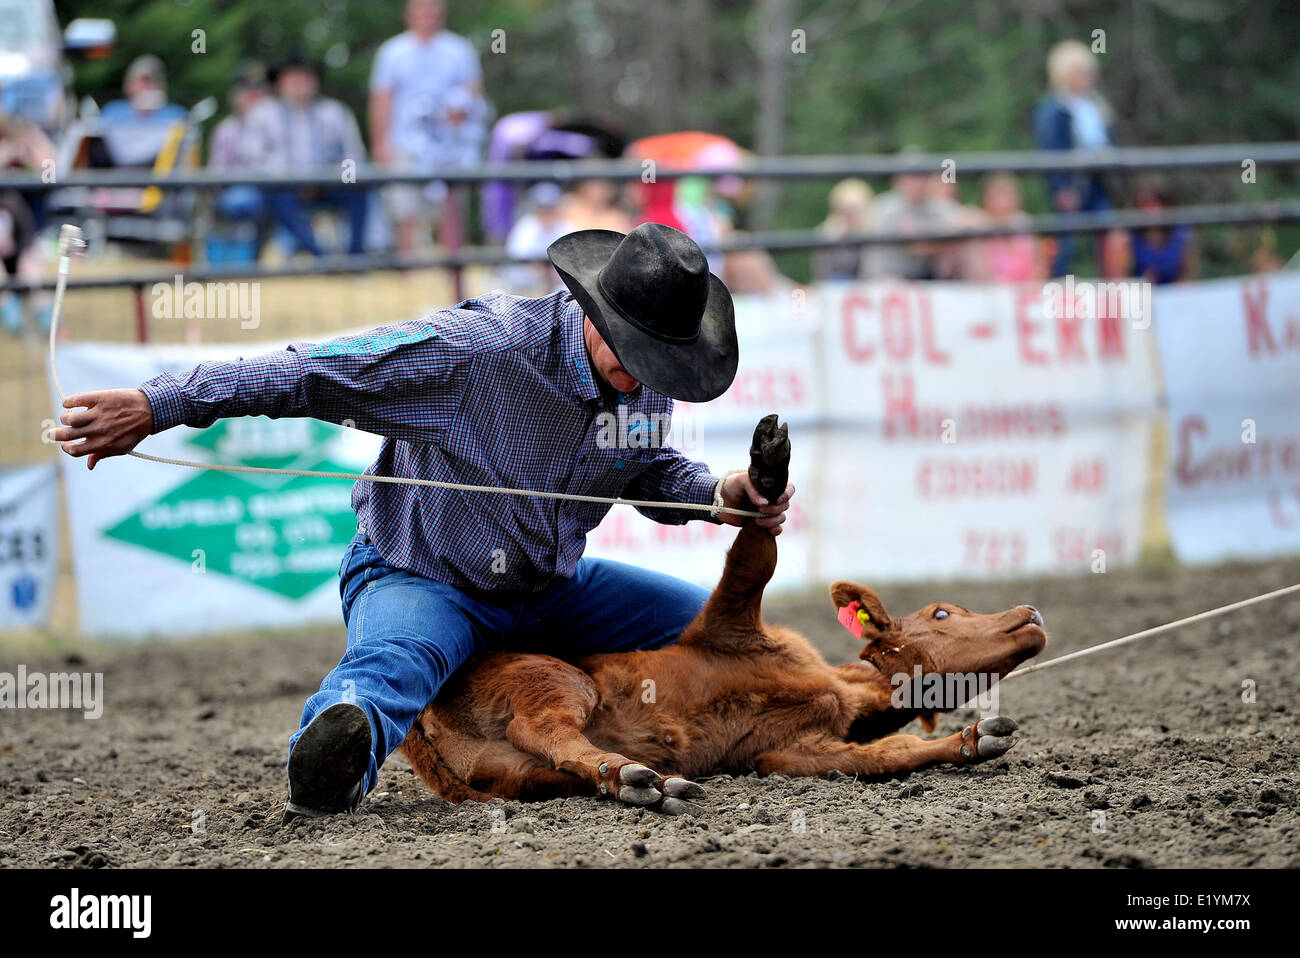 A cowboy competing in a tye down roping event at a rodeo in Alberta Canada. Stock Photo